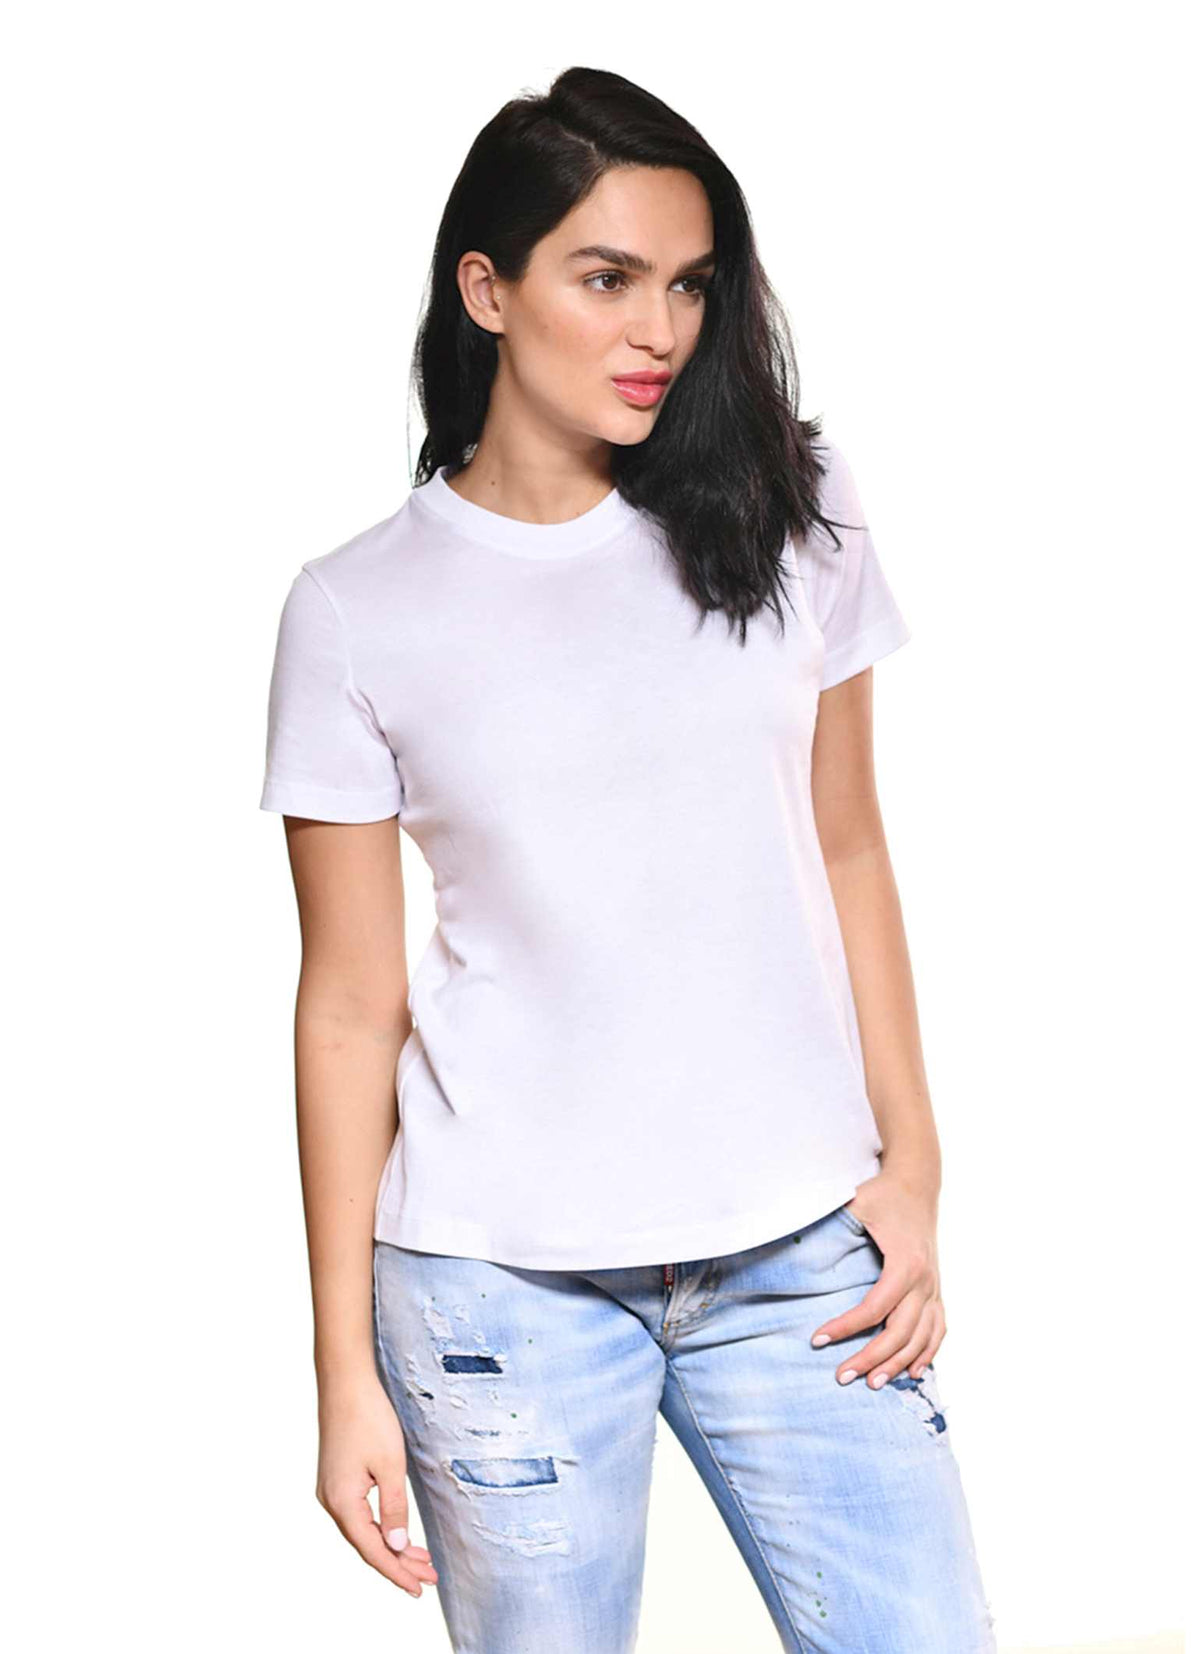 Carmen Sol round neck tee shirts for women in color white